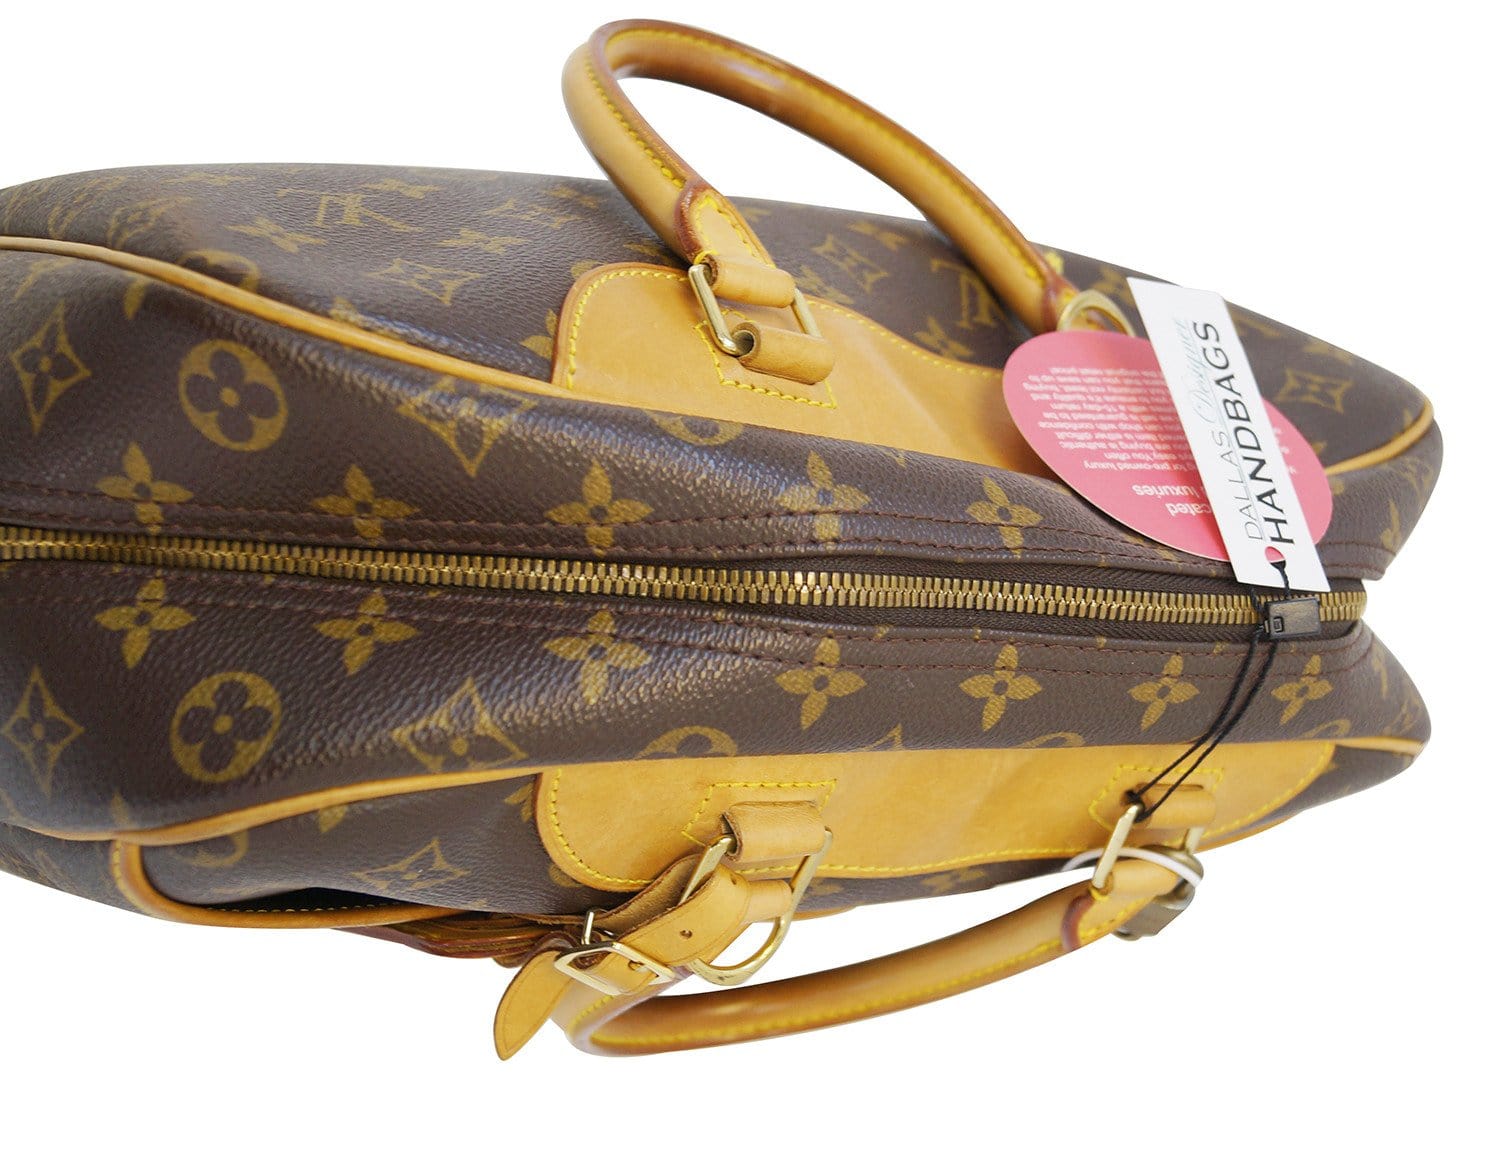 ViaAnabel - 🔸Louis Vuitton Deauville Monogram Canvas Handbag This bags are  the larger version of the Trouville and they are famous for their spacious  vanity case. Travel in style with this gorgeous